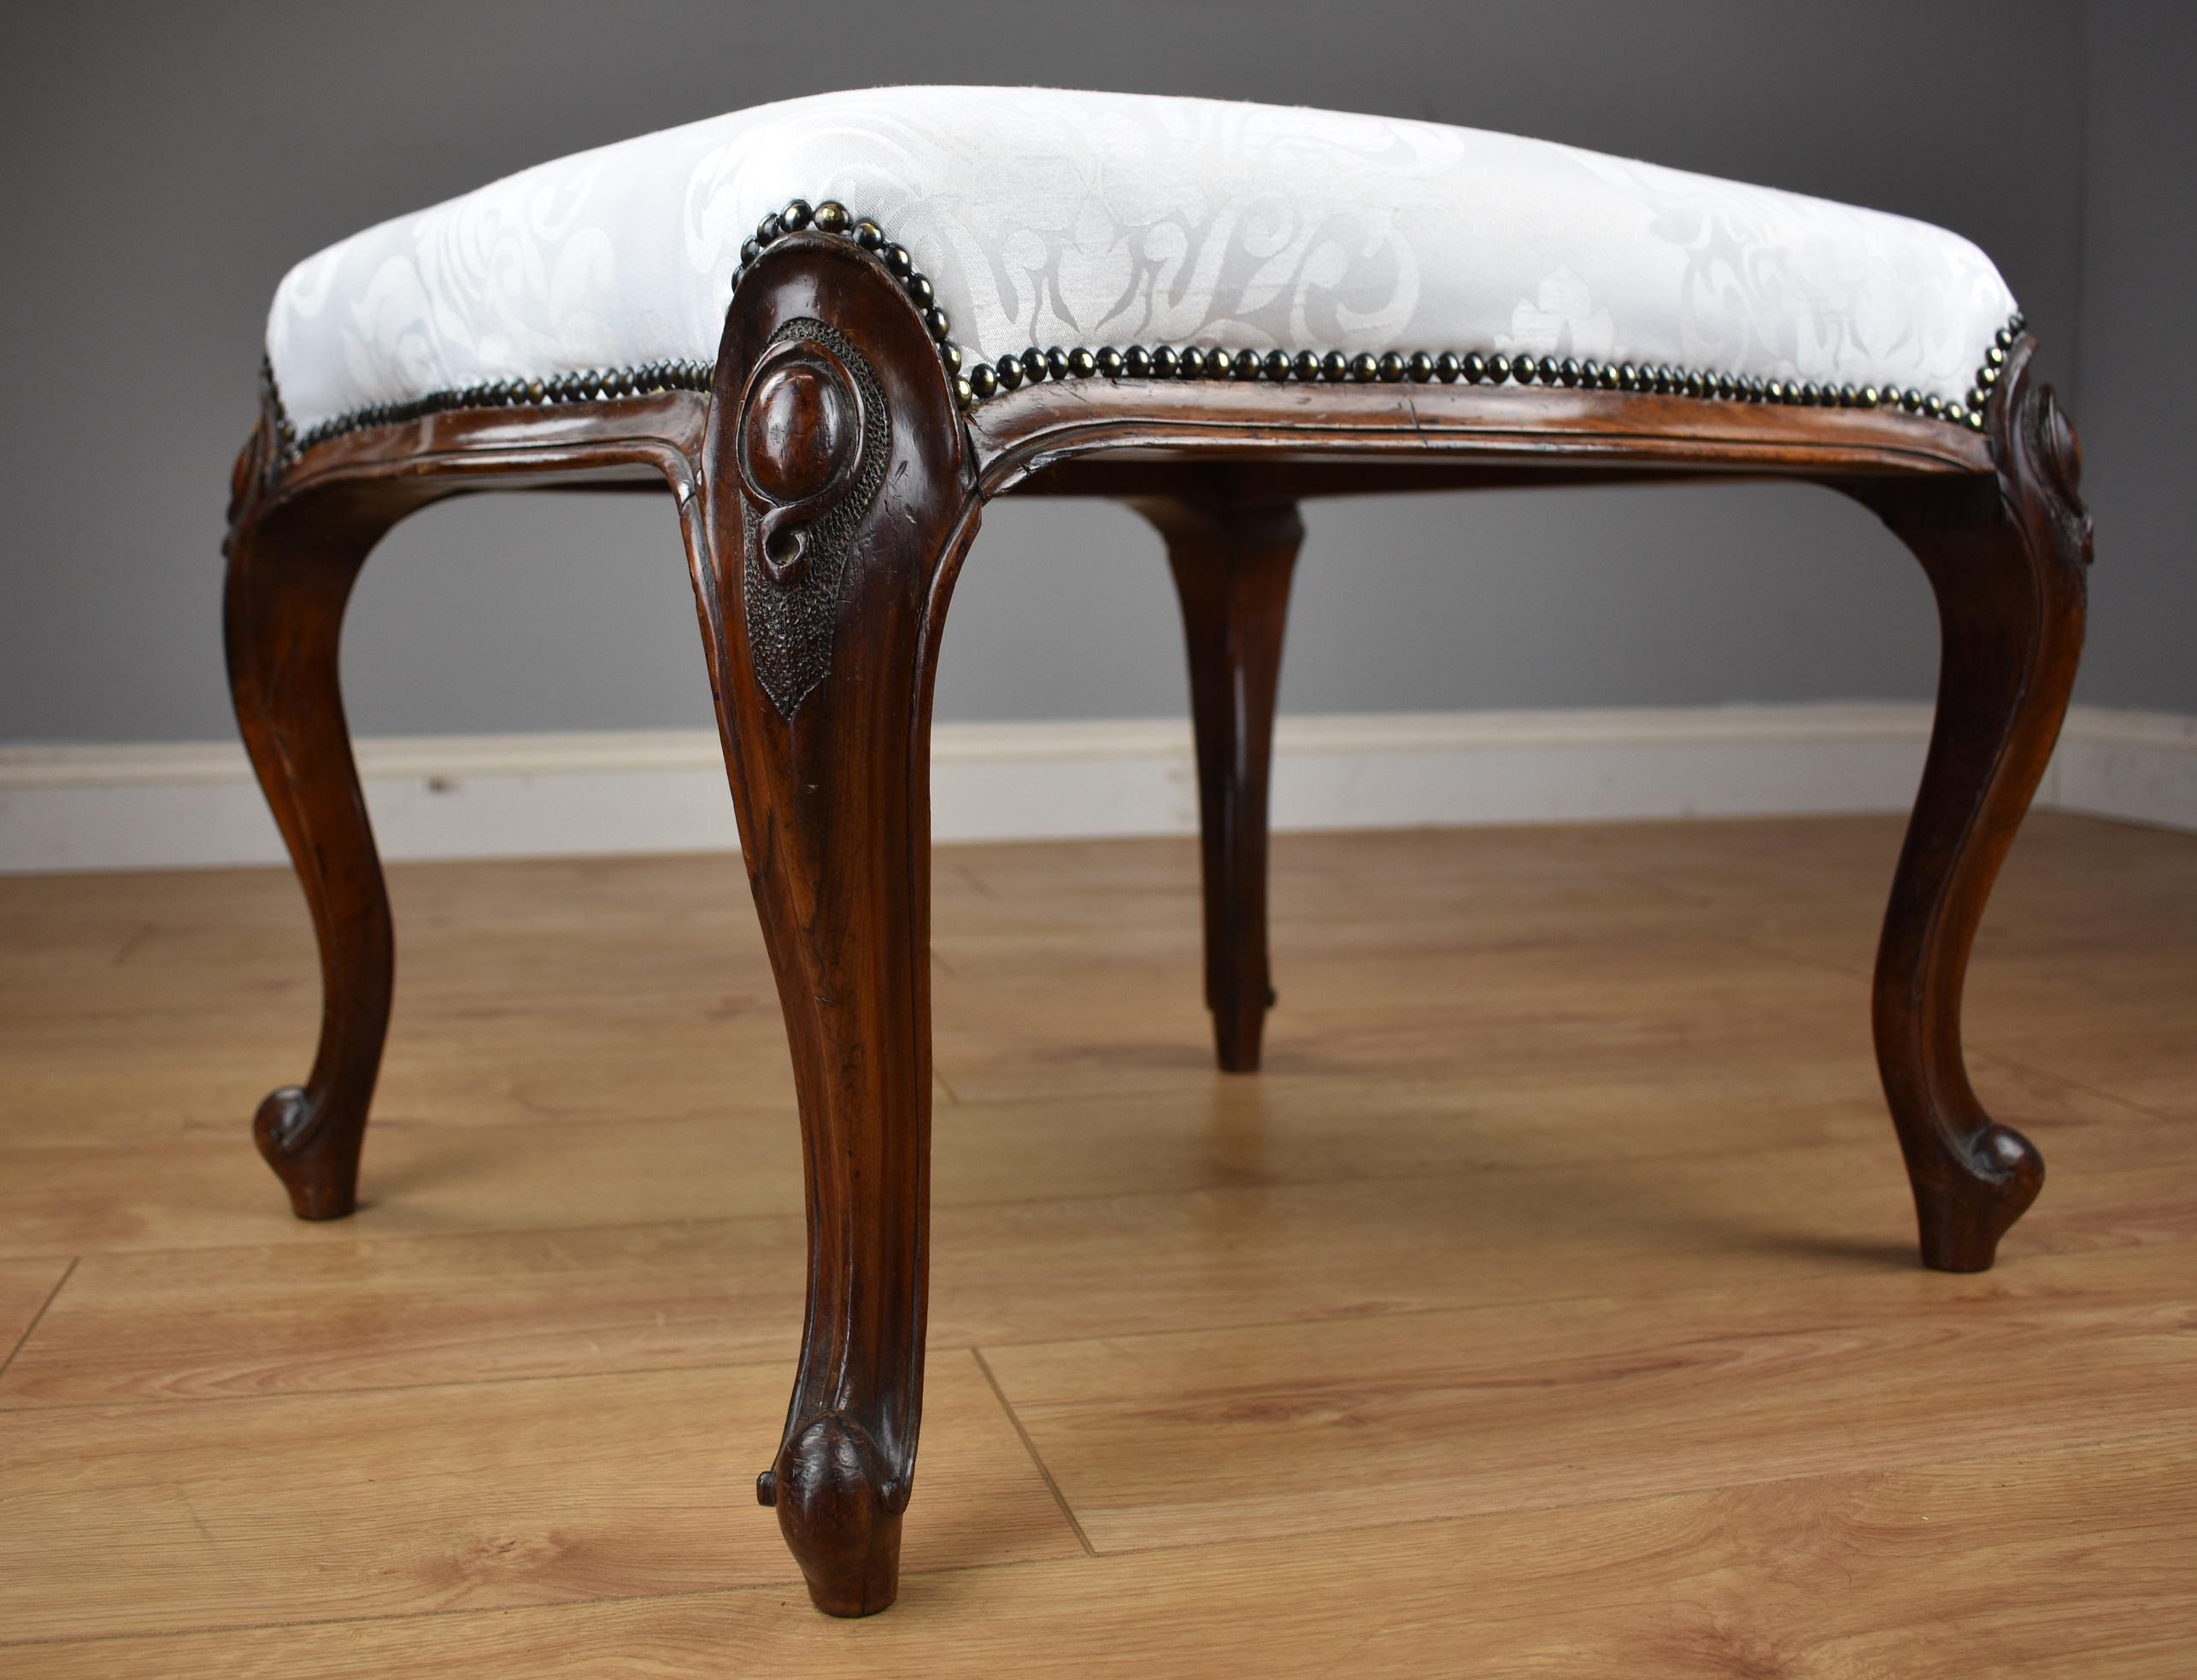 For sale is a good quality Victorian Mahogany foot stool, being serpentine in form, upholstered in floral damask faux silk, standing on elegant carved cabriole legs. This piece is in excellent condition for its age.

Width: 23